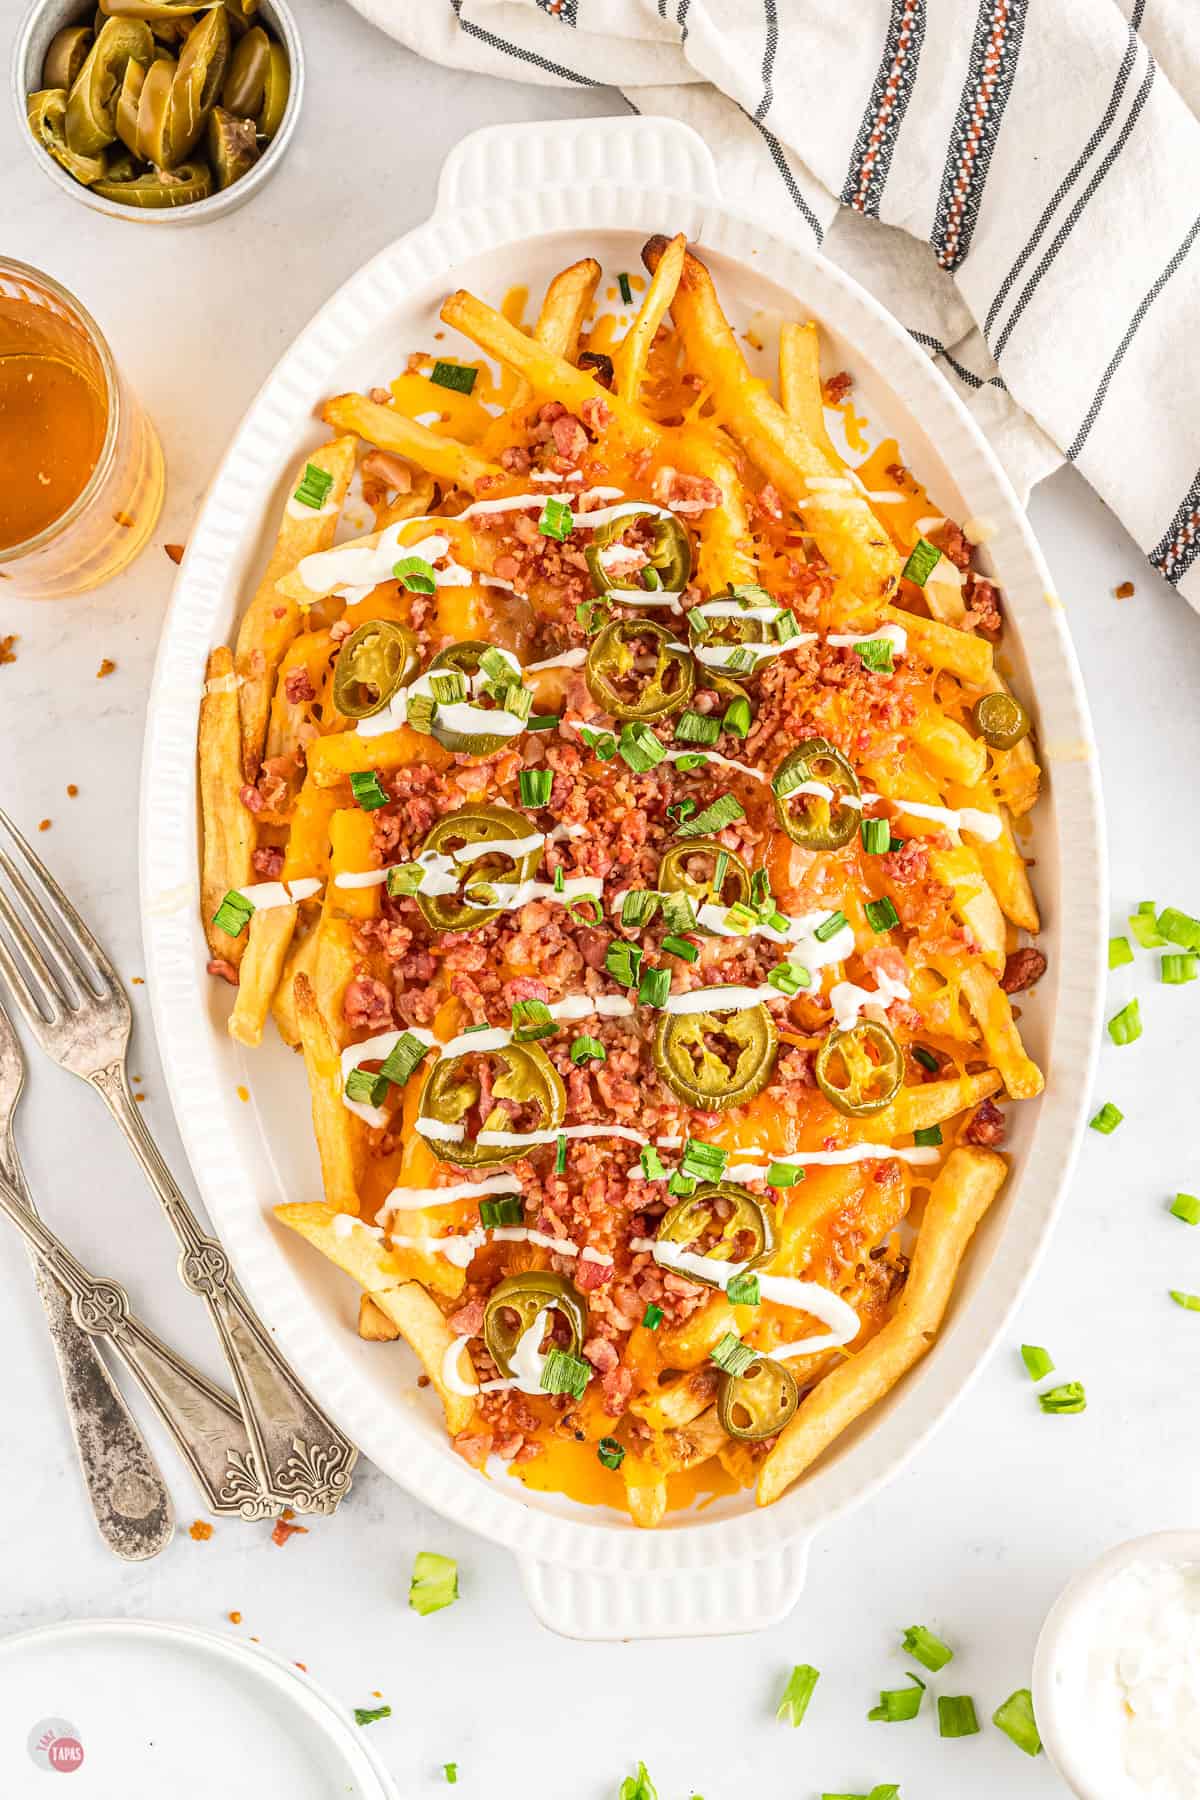 French fries loaded with cheese, bacon, and jalapeños, topped with green onions and drizzled with sour cream in a white baking dish on a table.